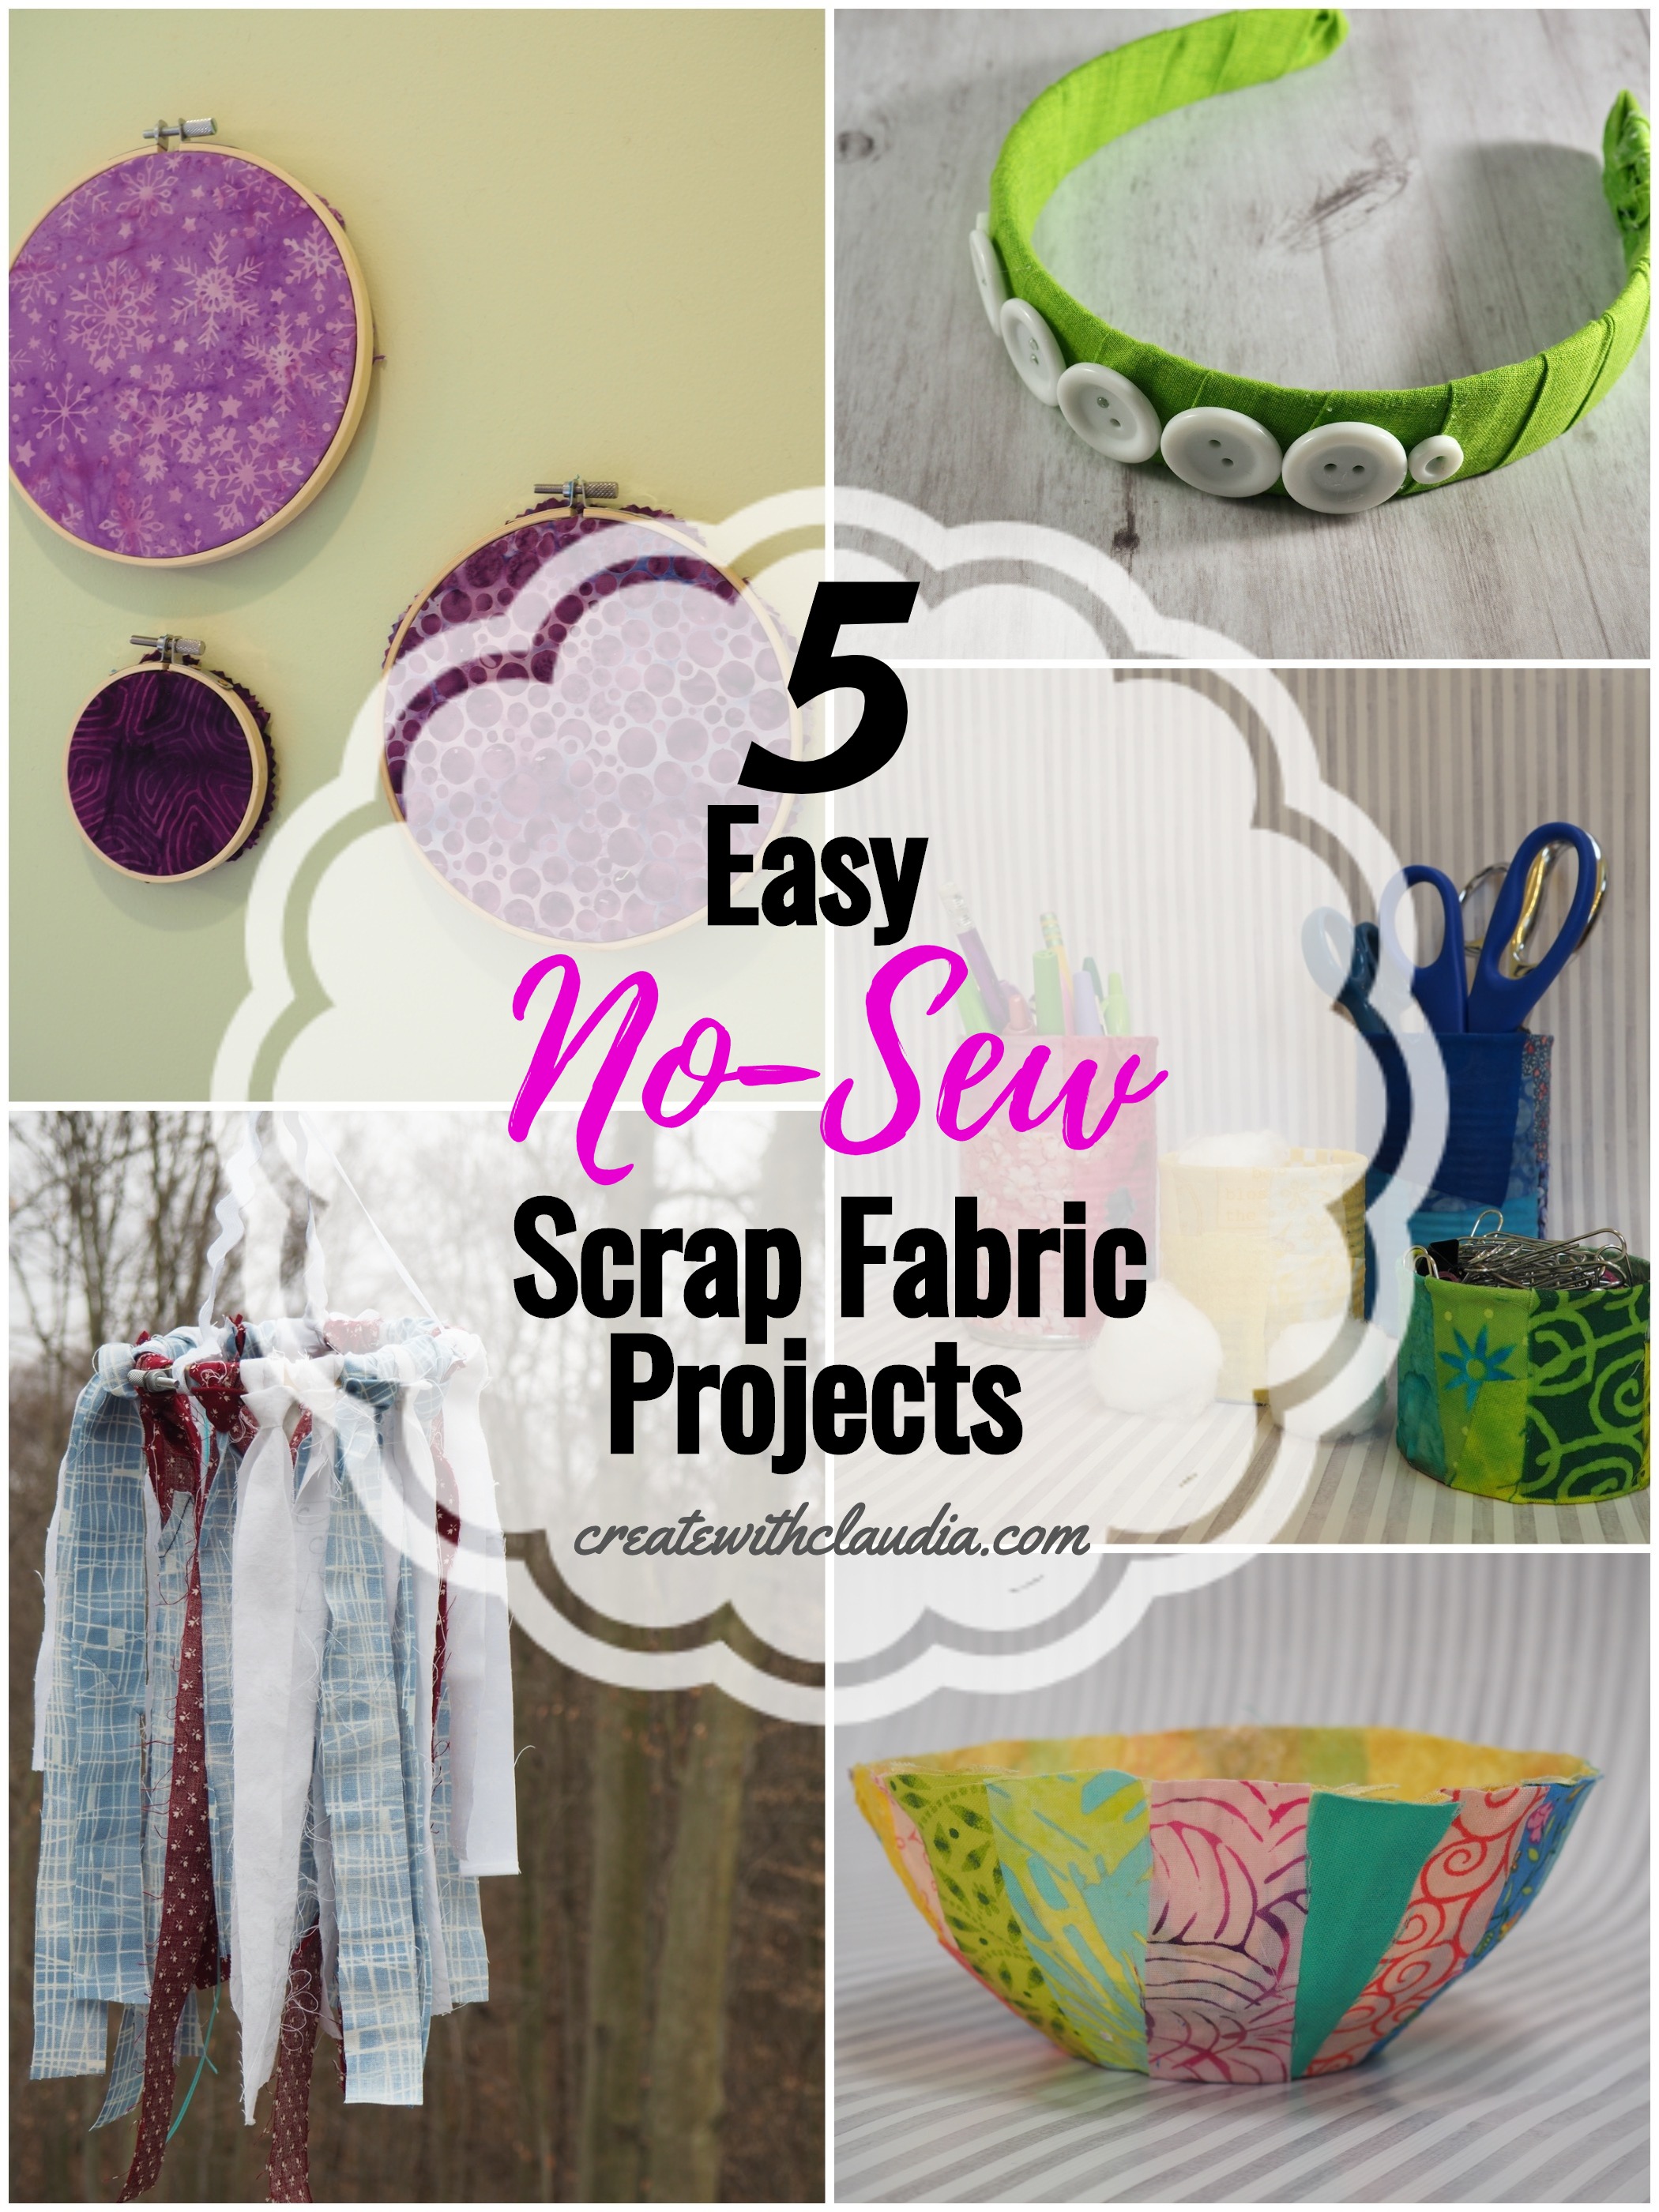 easy-no-sew-scrap-fabric-projects-create-with-claudia